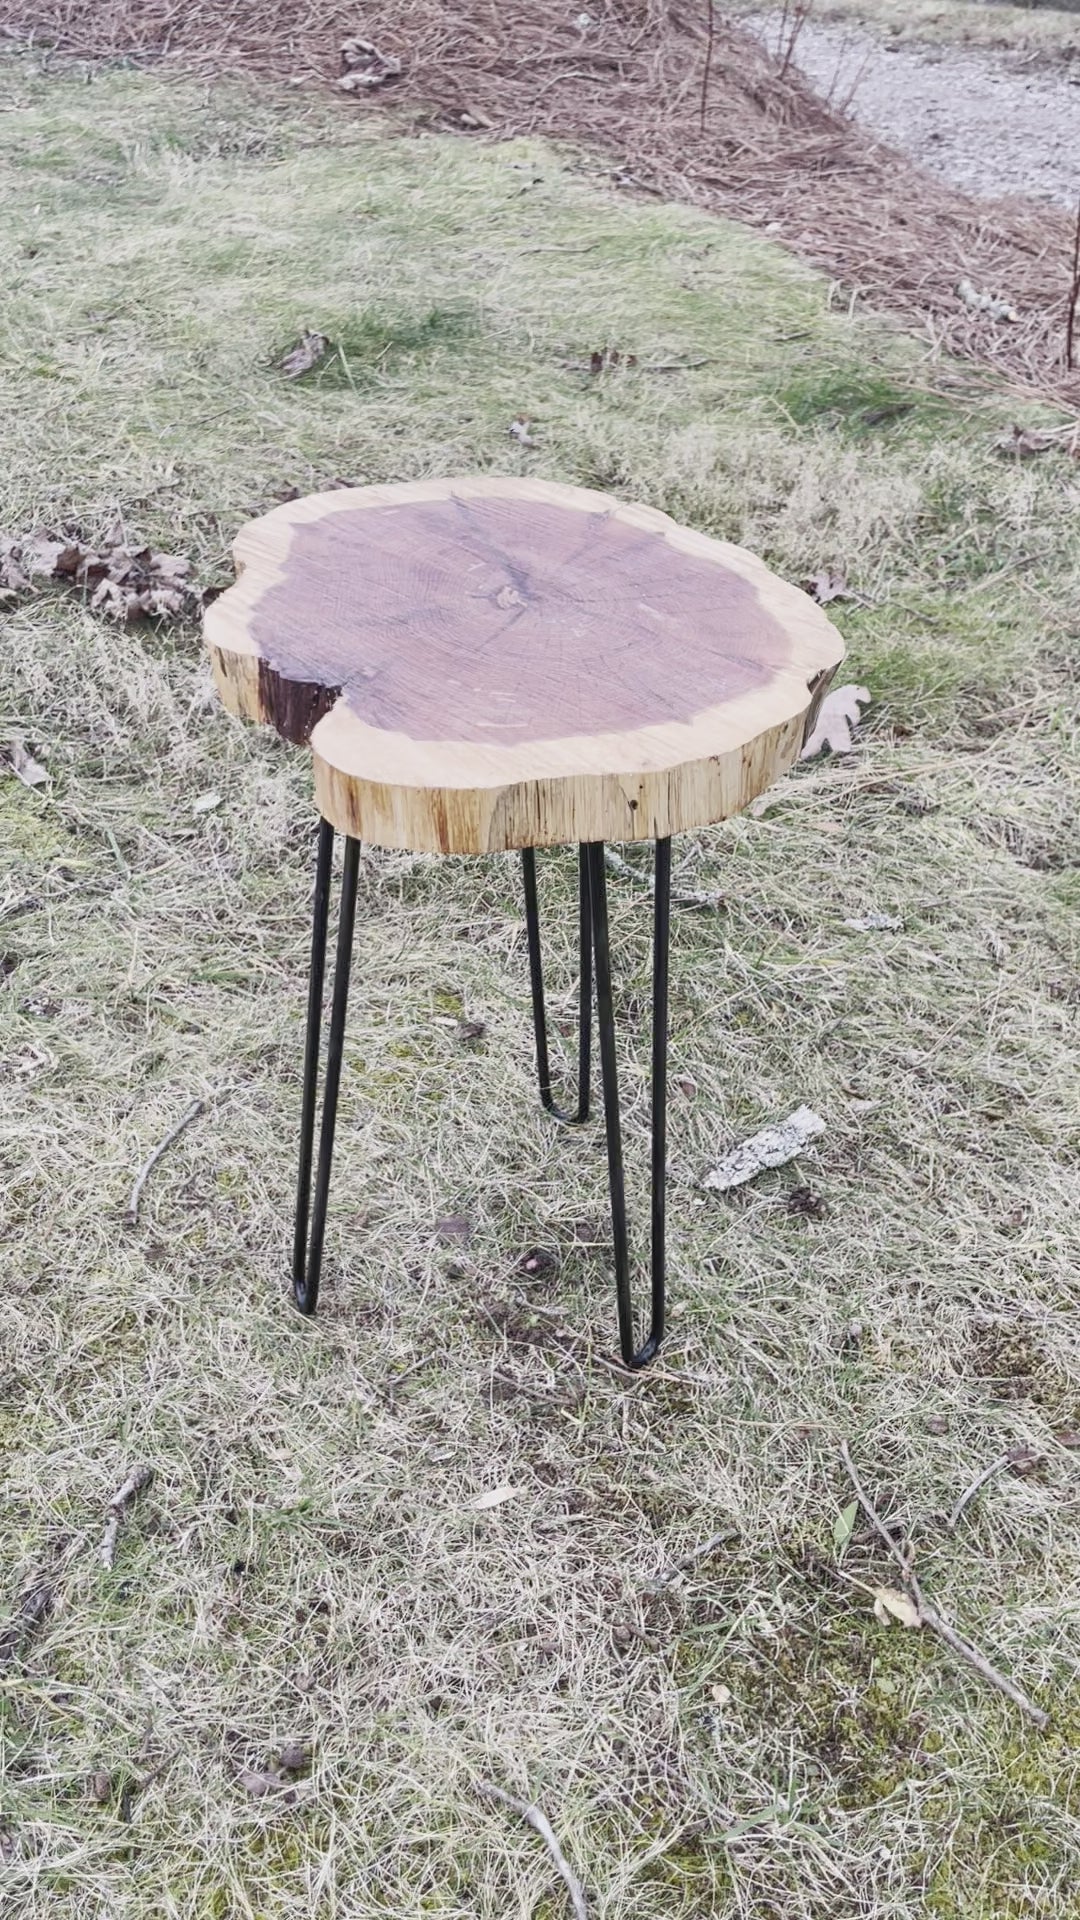 The side table pictured is made from hand-shaped metal hairpin legs and a handmade live edge cedar slab with a food safe finish. 